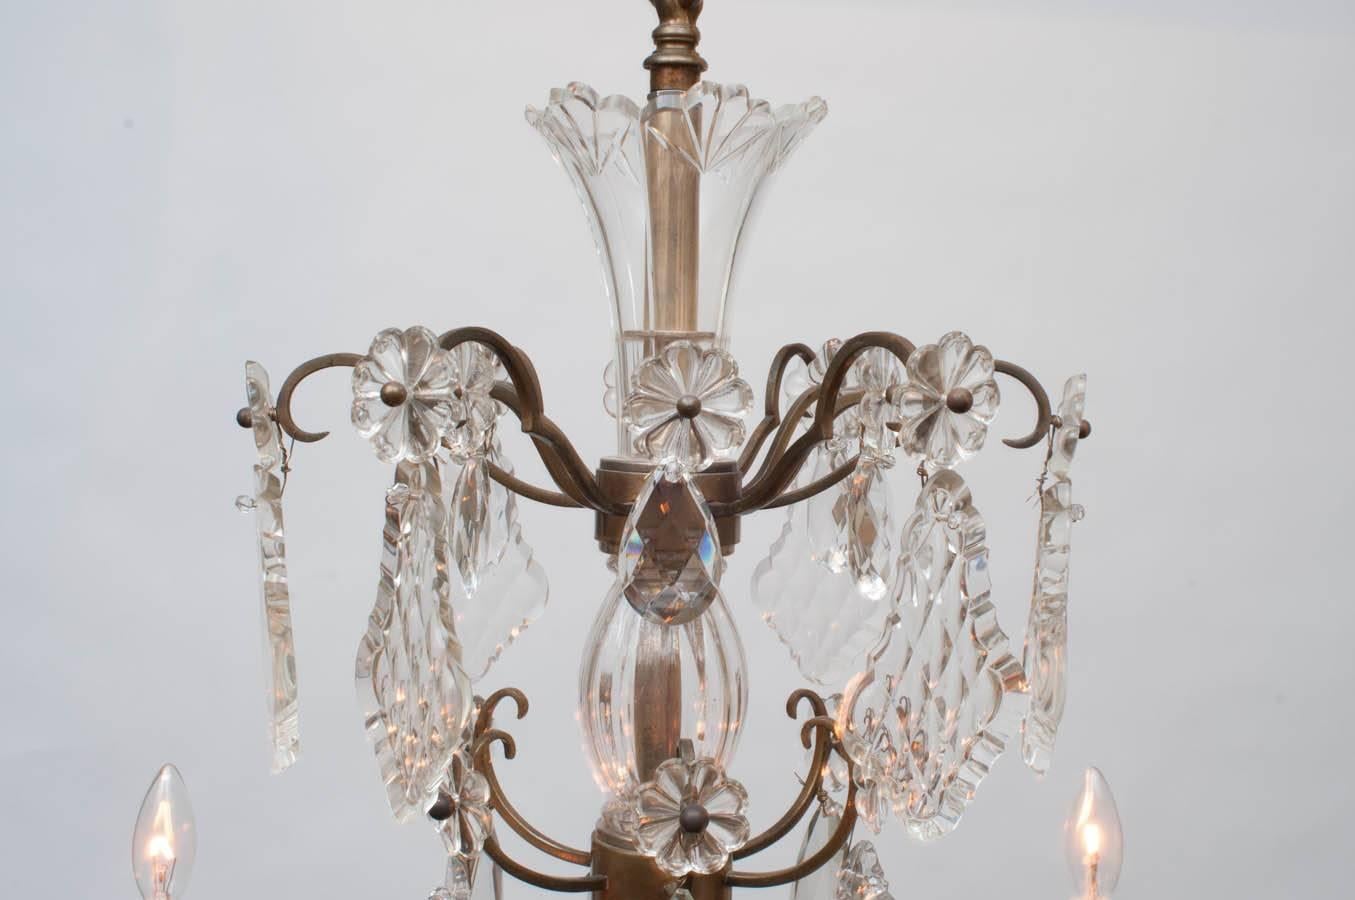 Excellent cut-glass center, unusual waffle Baccarat style florets, chain, ceiling cap and hanging hardware included.